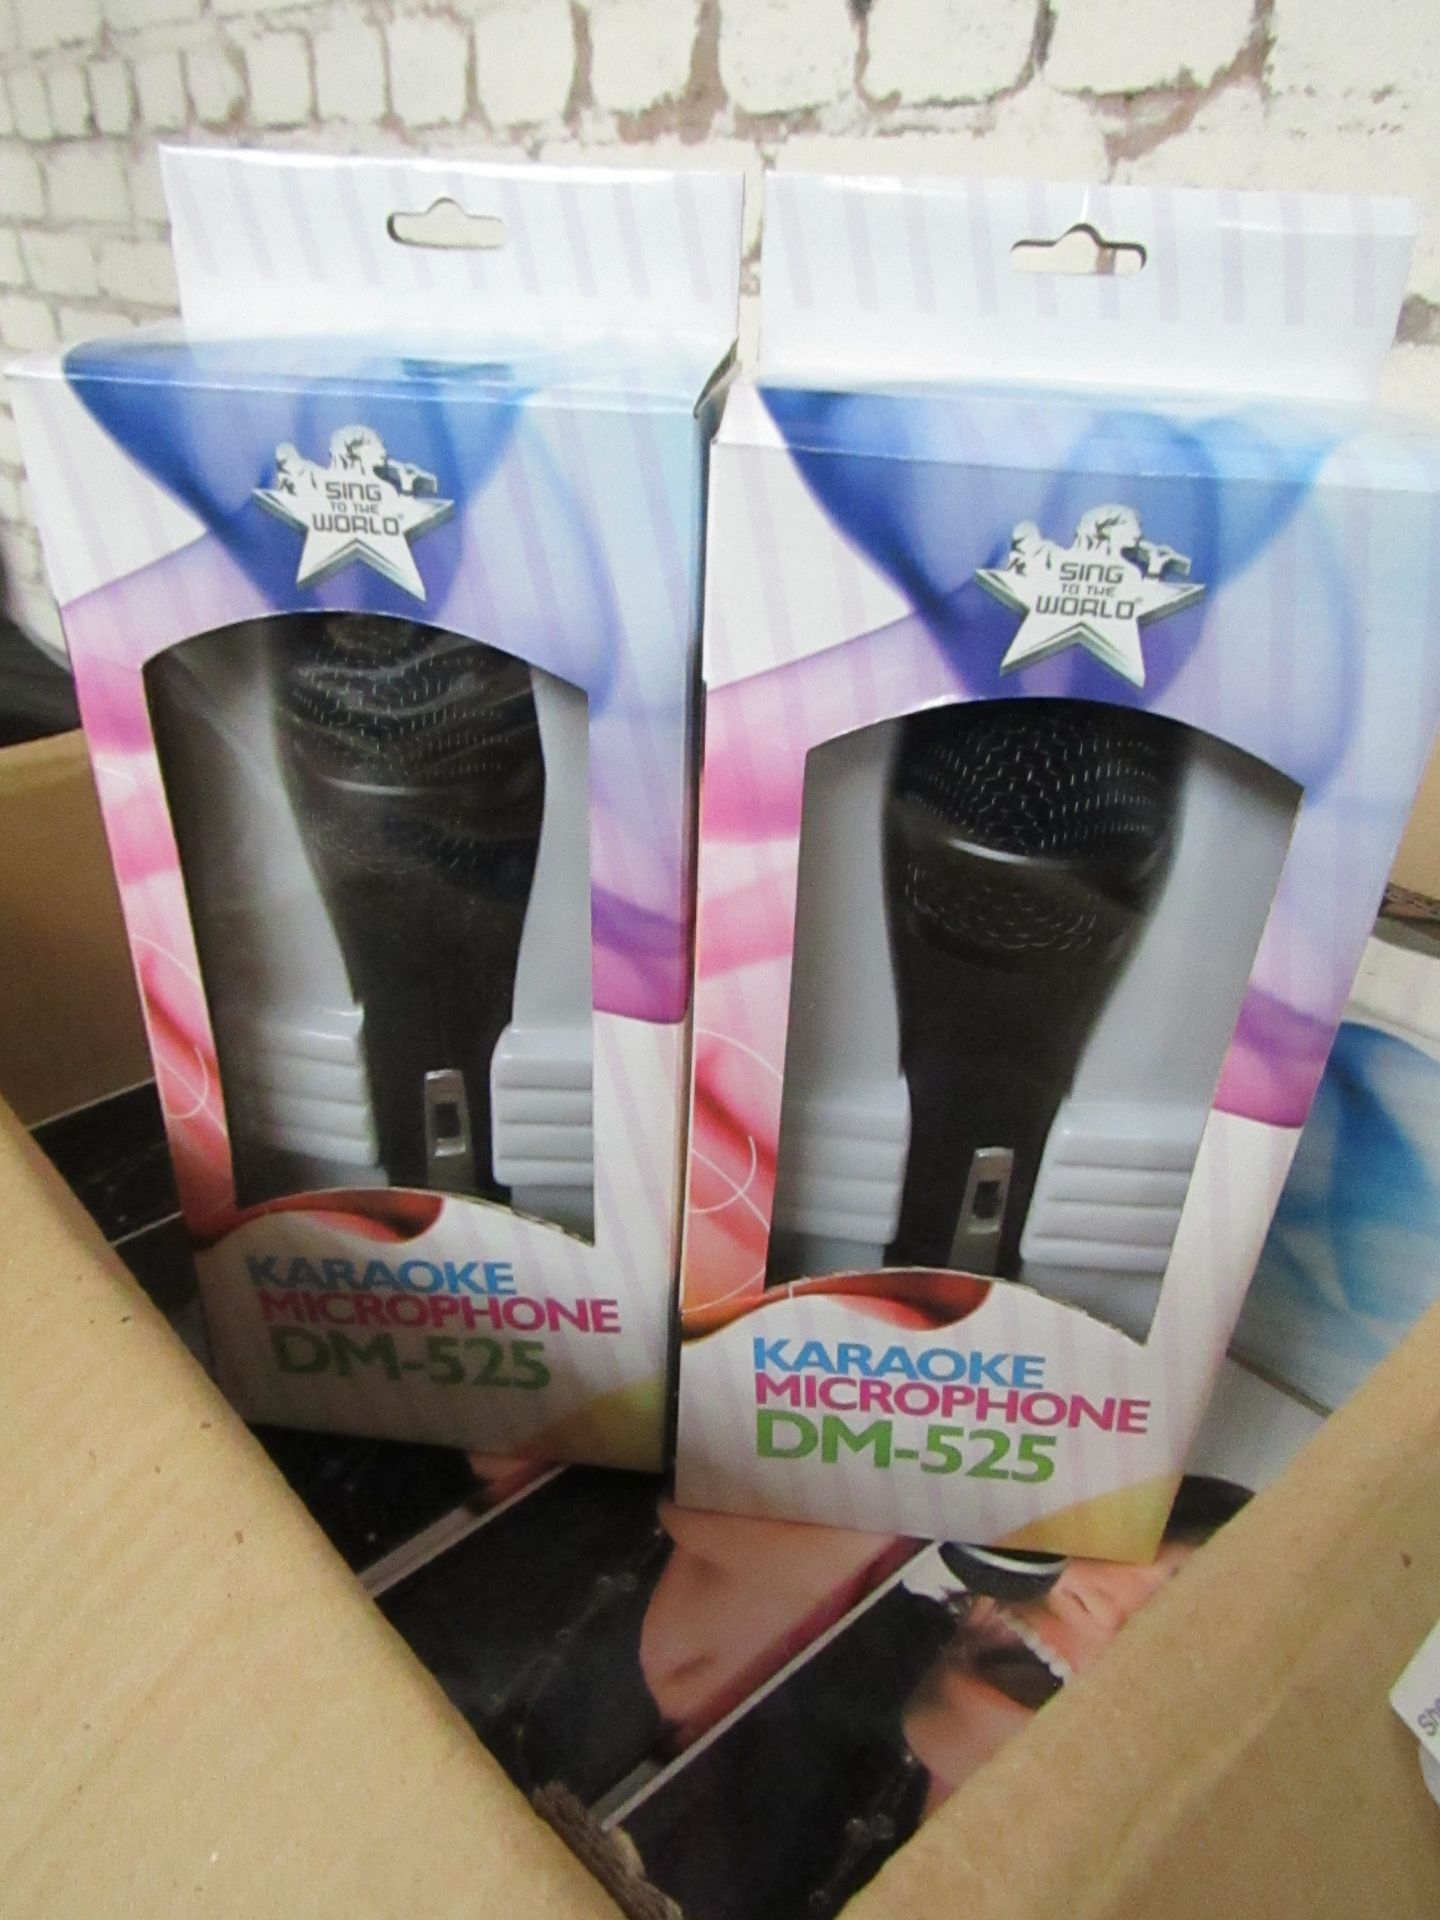 2 X Sing To The World Karaoke Microphone DM-525 RRP £9.99 each new & packaged